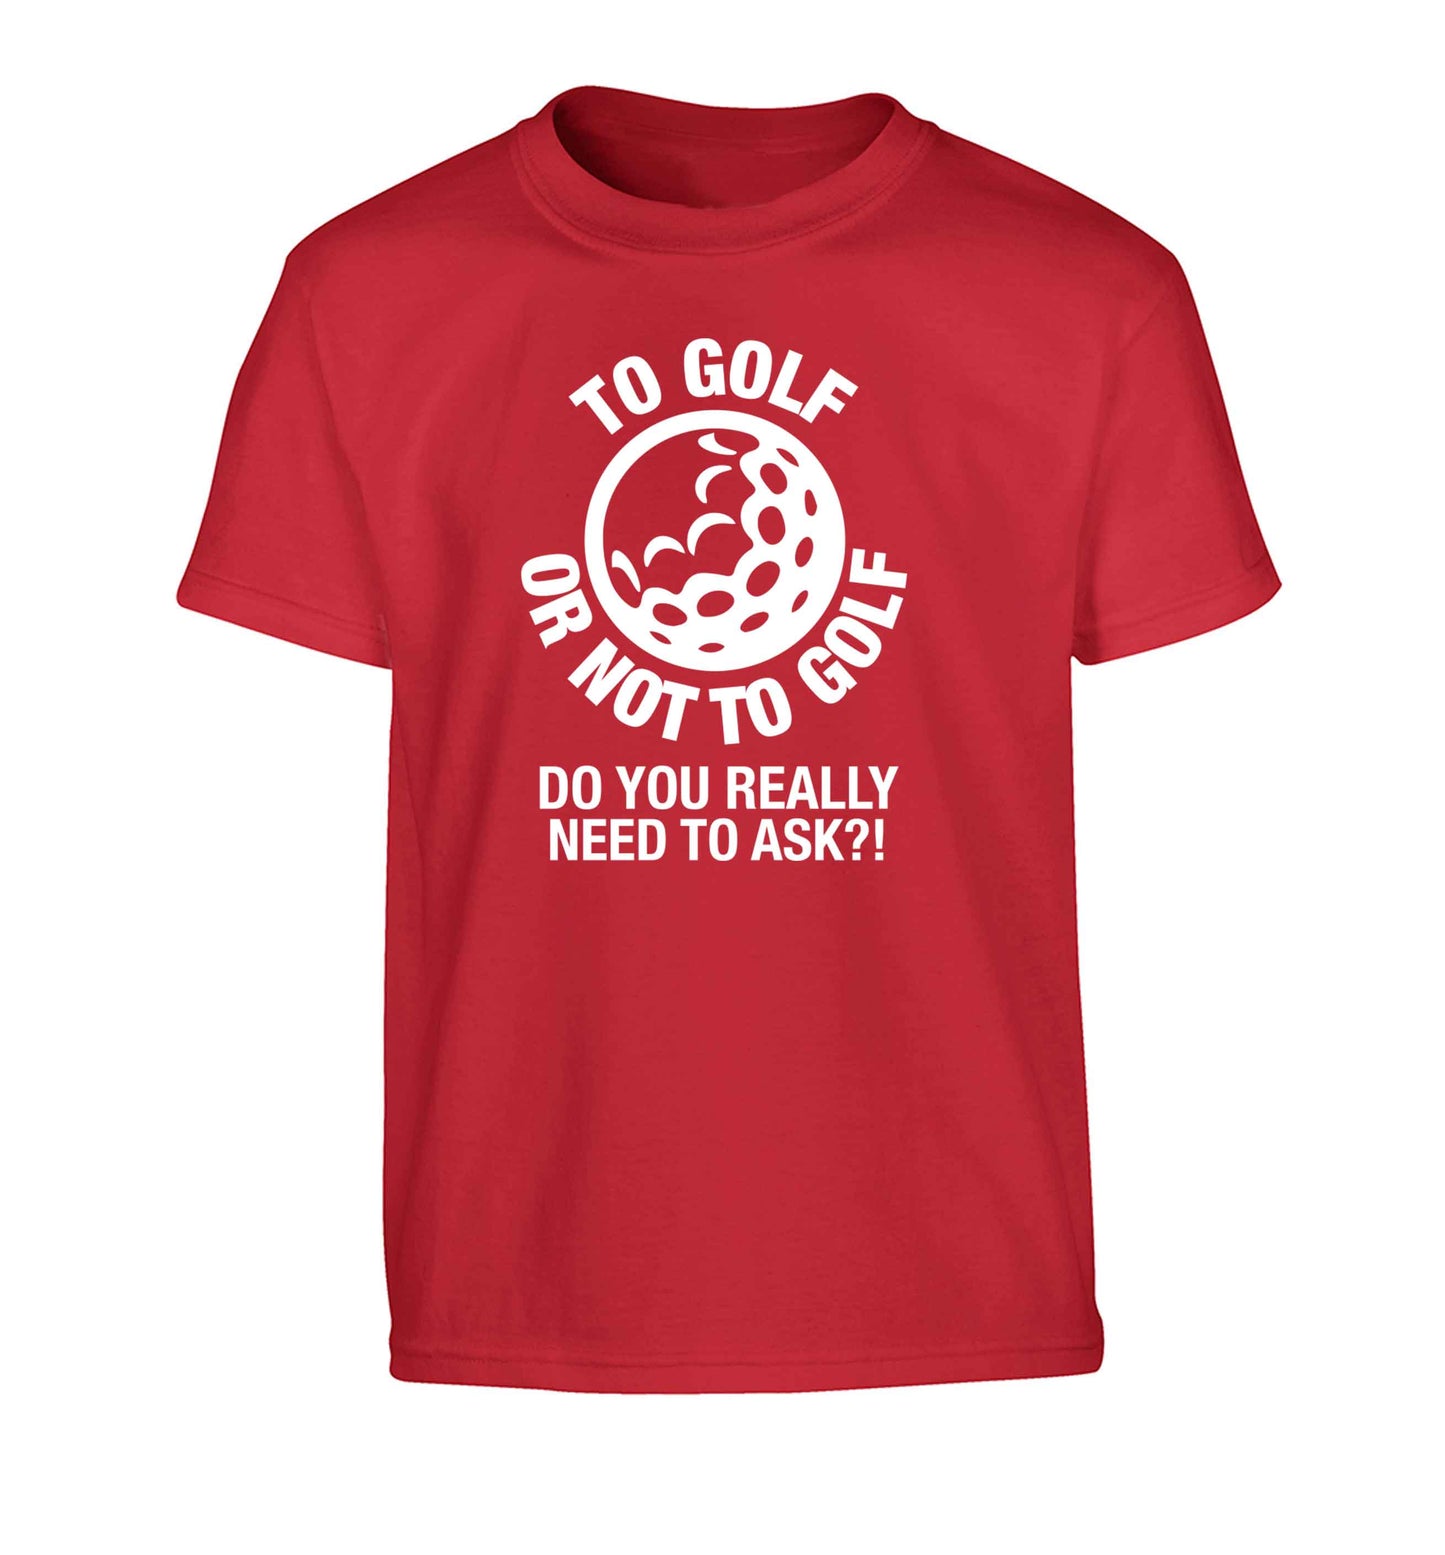 To golf or not to golf Do you really need to ask?! Children's red Tshirt 12-13 Years